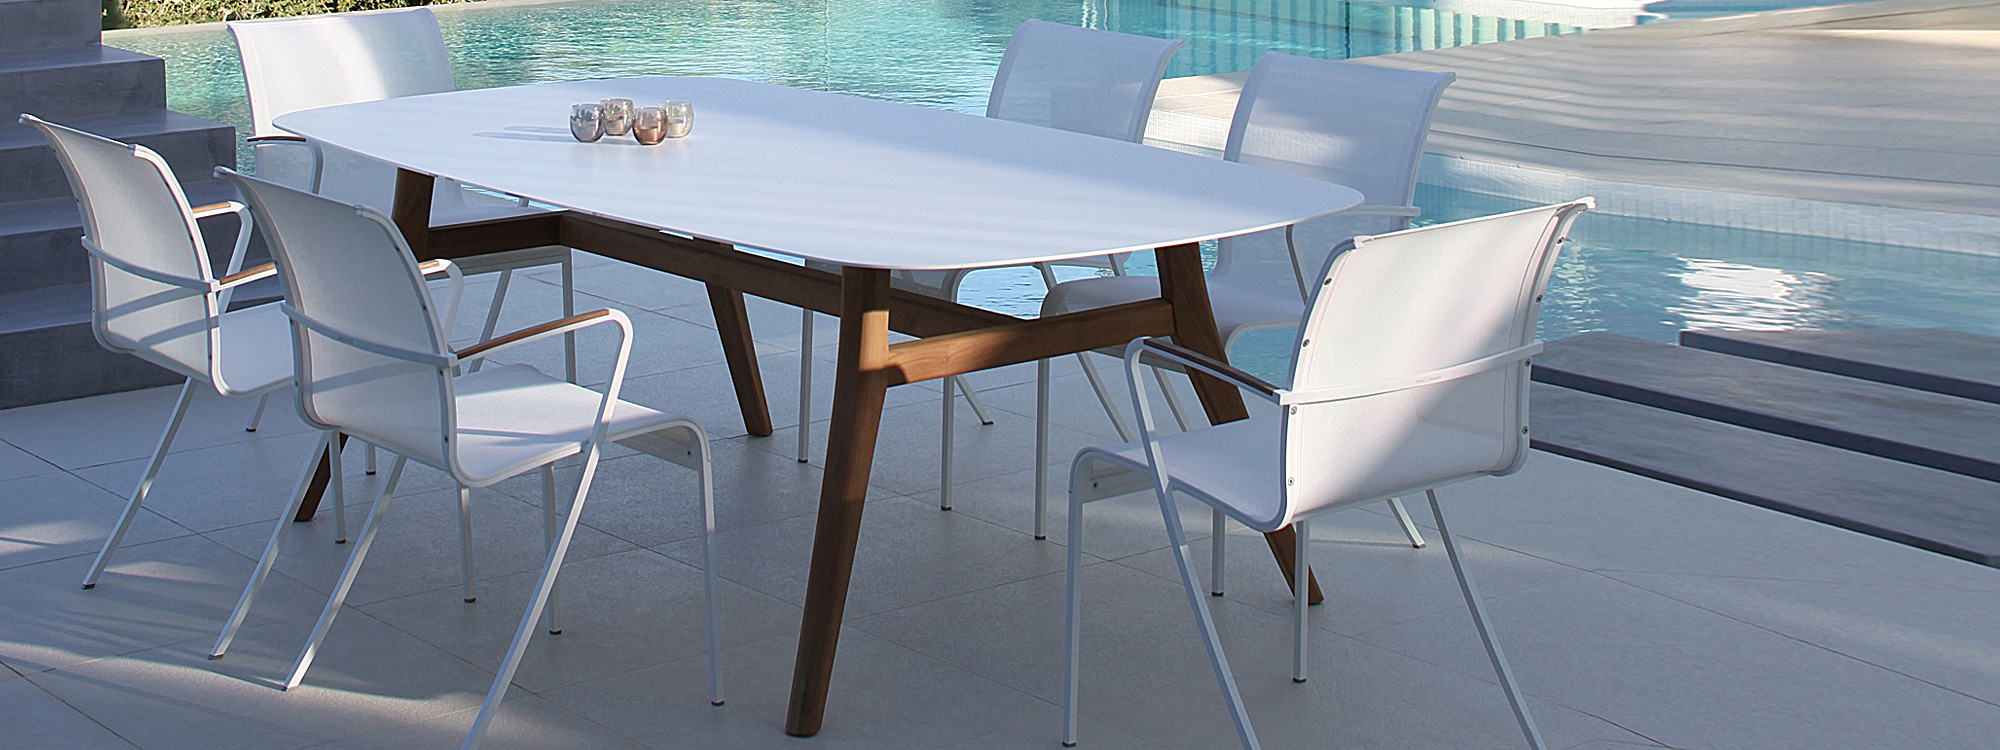 Image of white QT55 chair & Zidiz table with teak legs and white ceramic top by Royal Botania